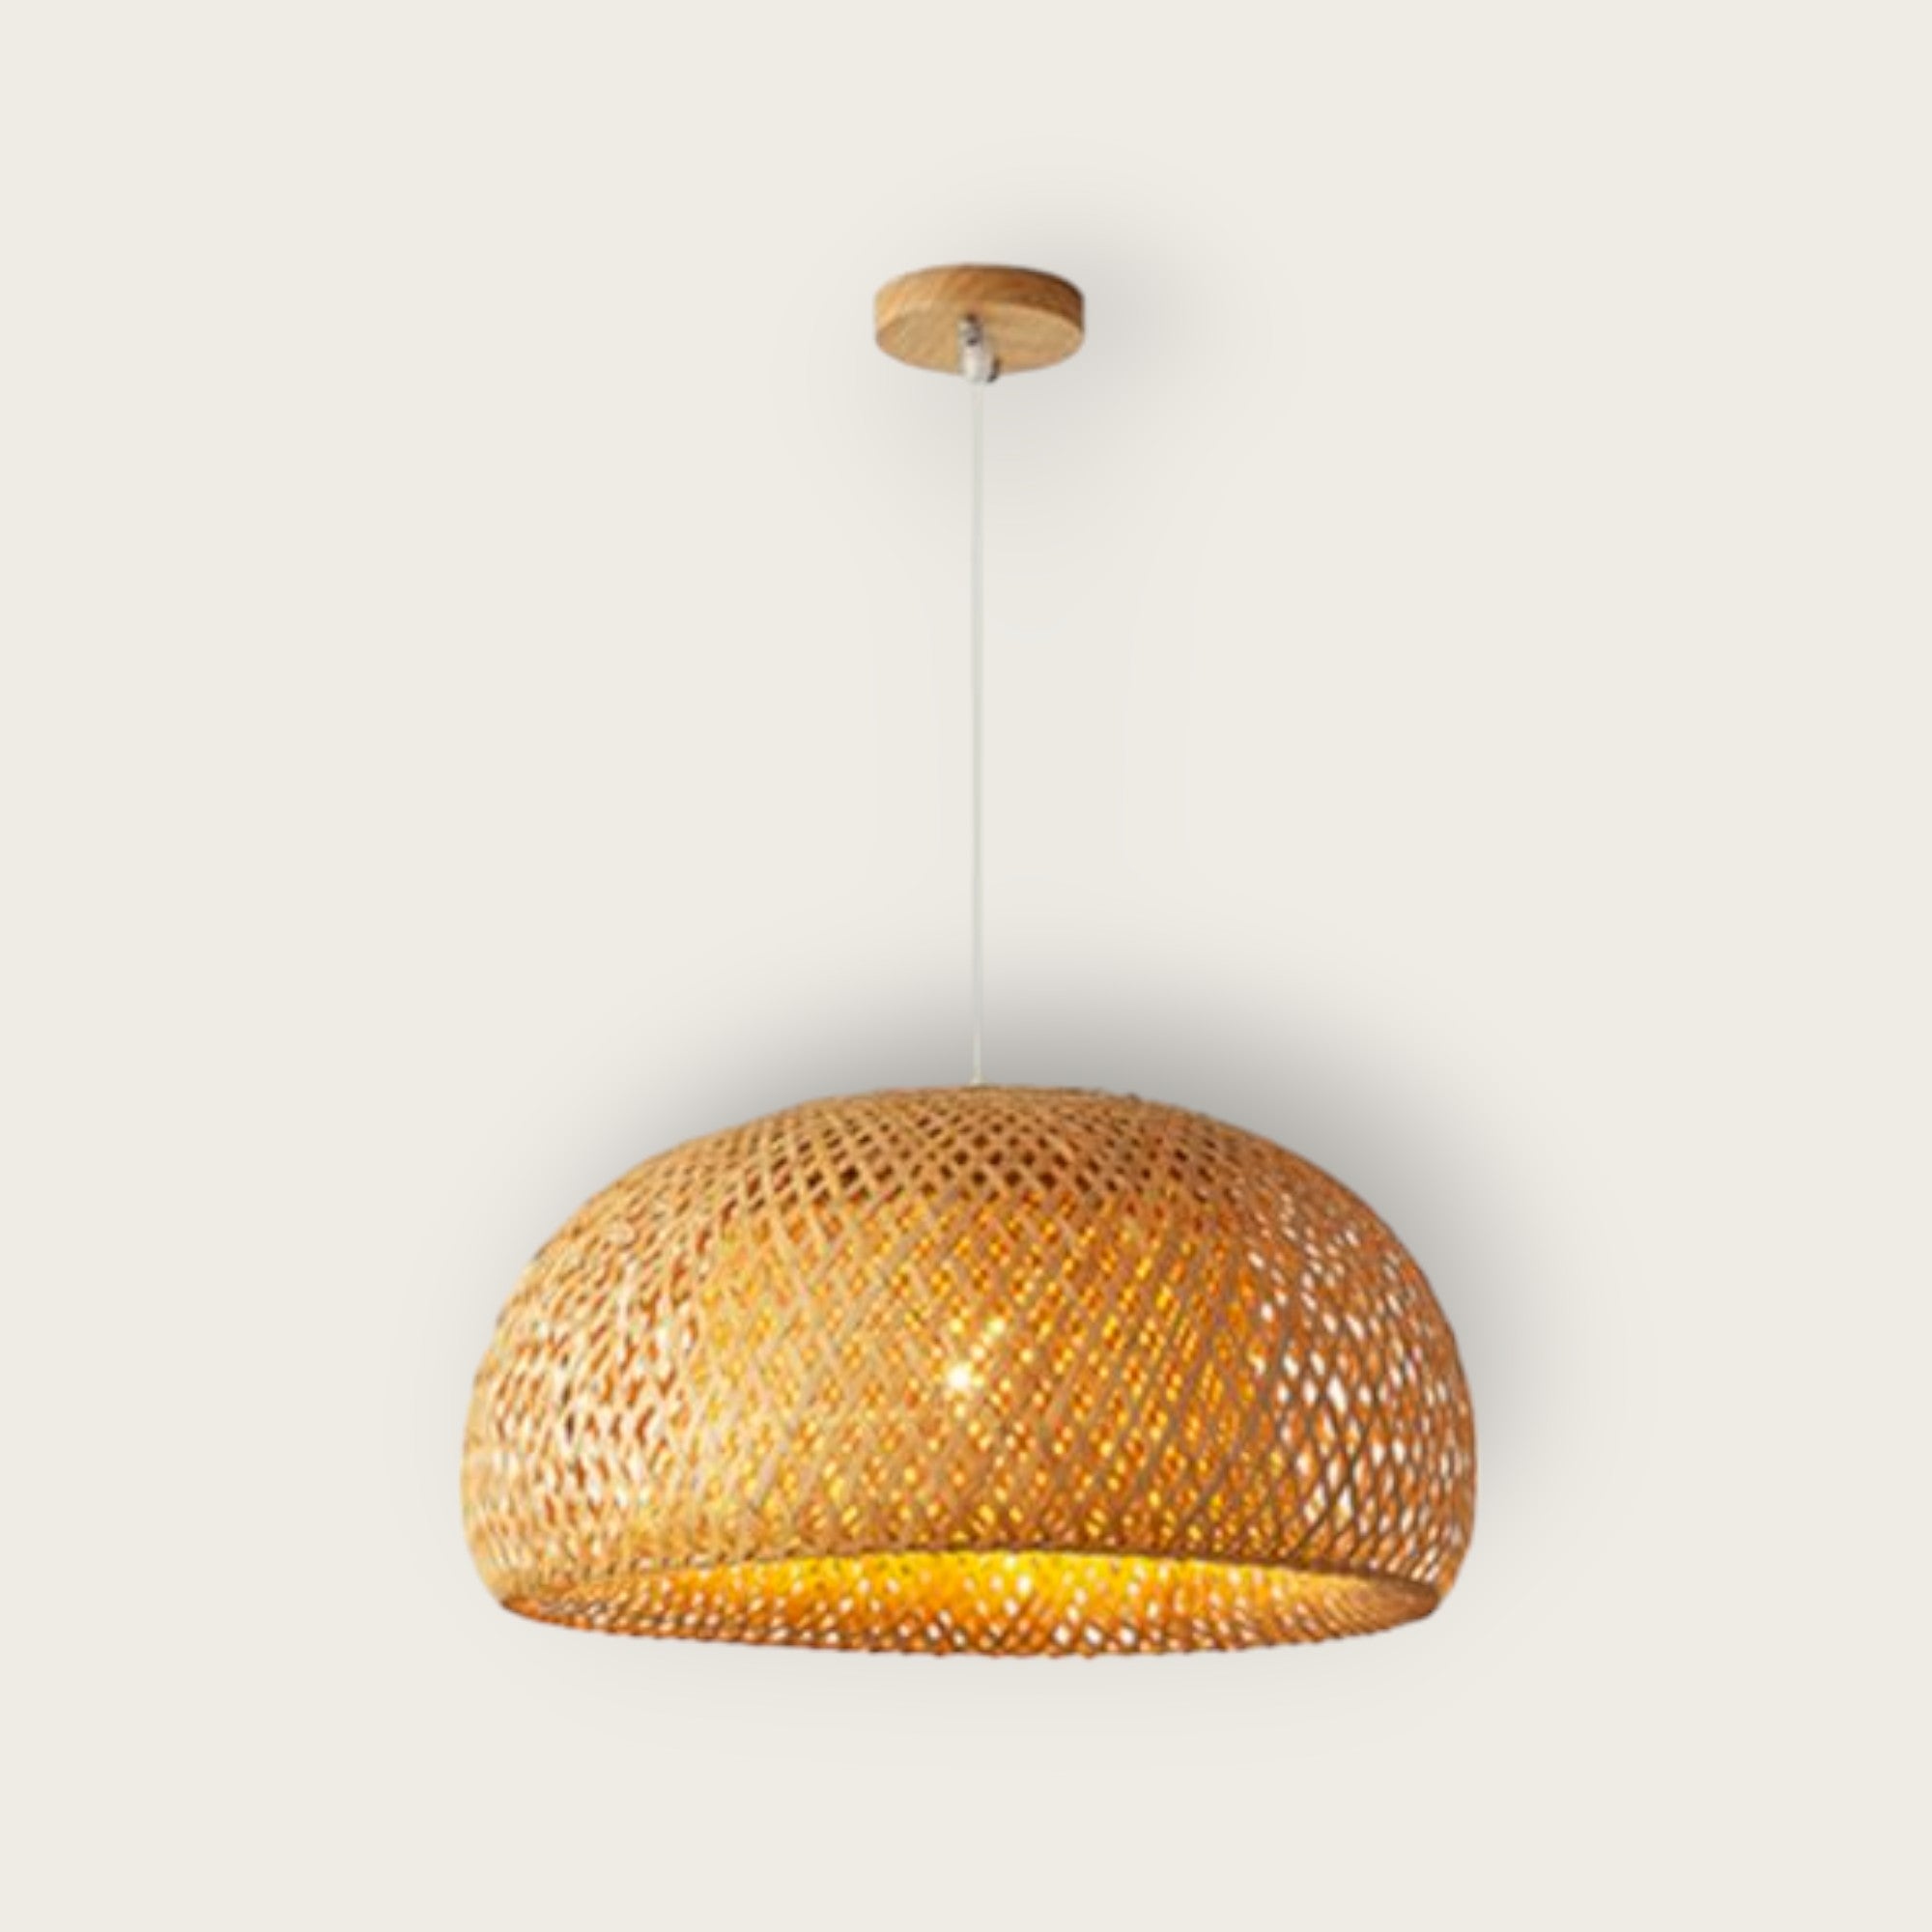 Bamboo Woven Simple Japanese Creative Pastoral Chandelier